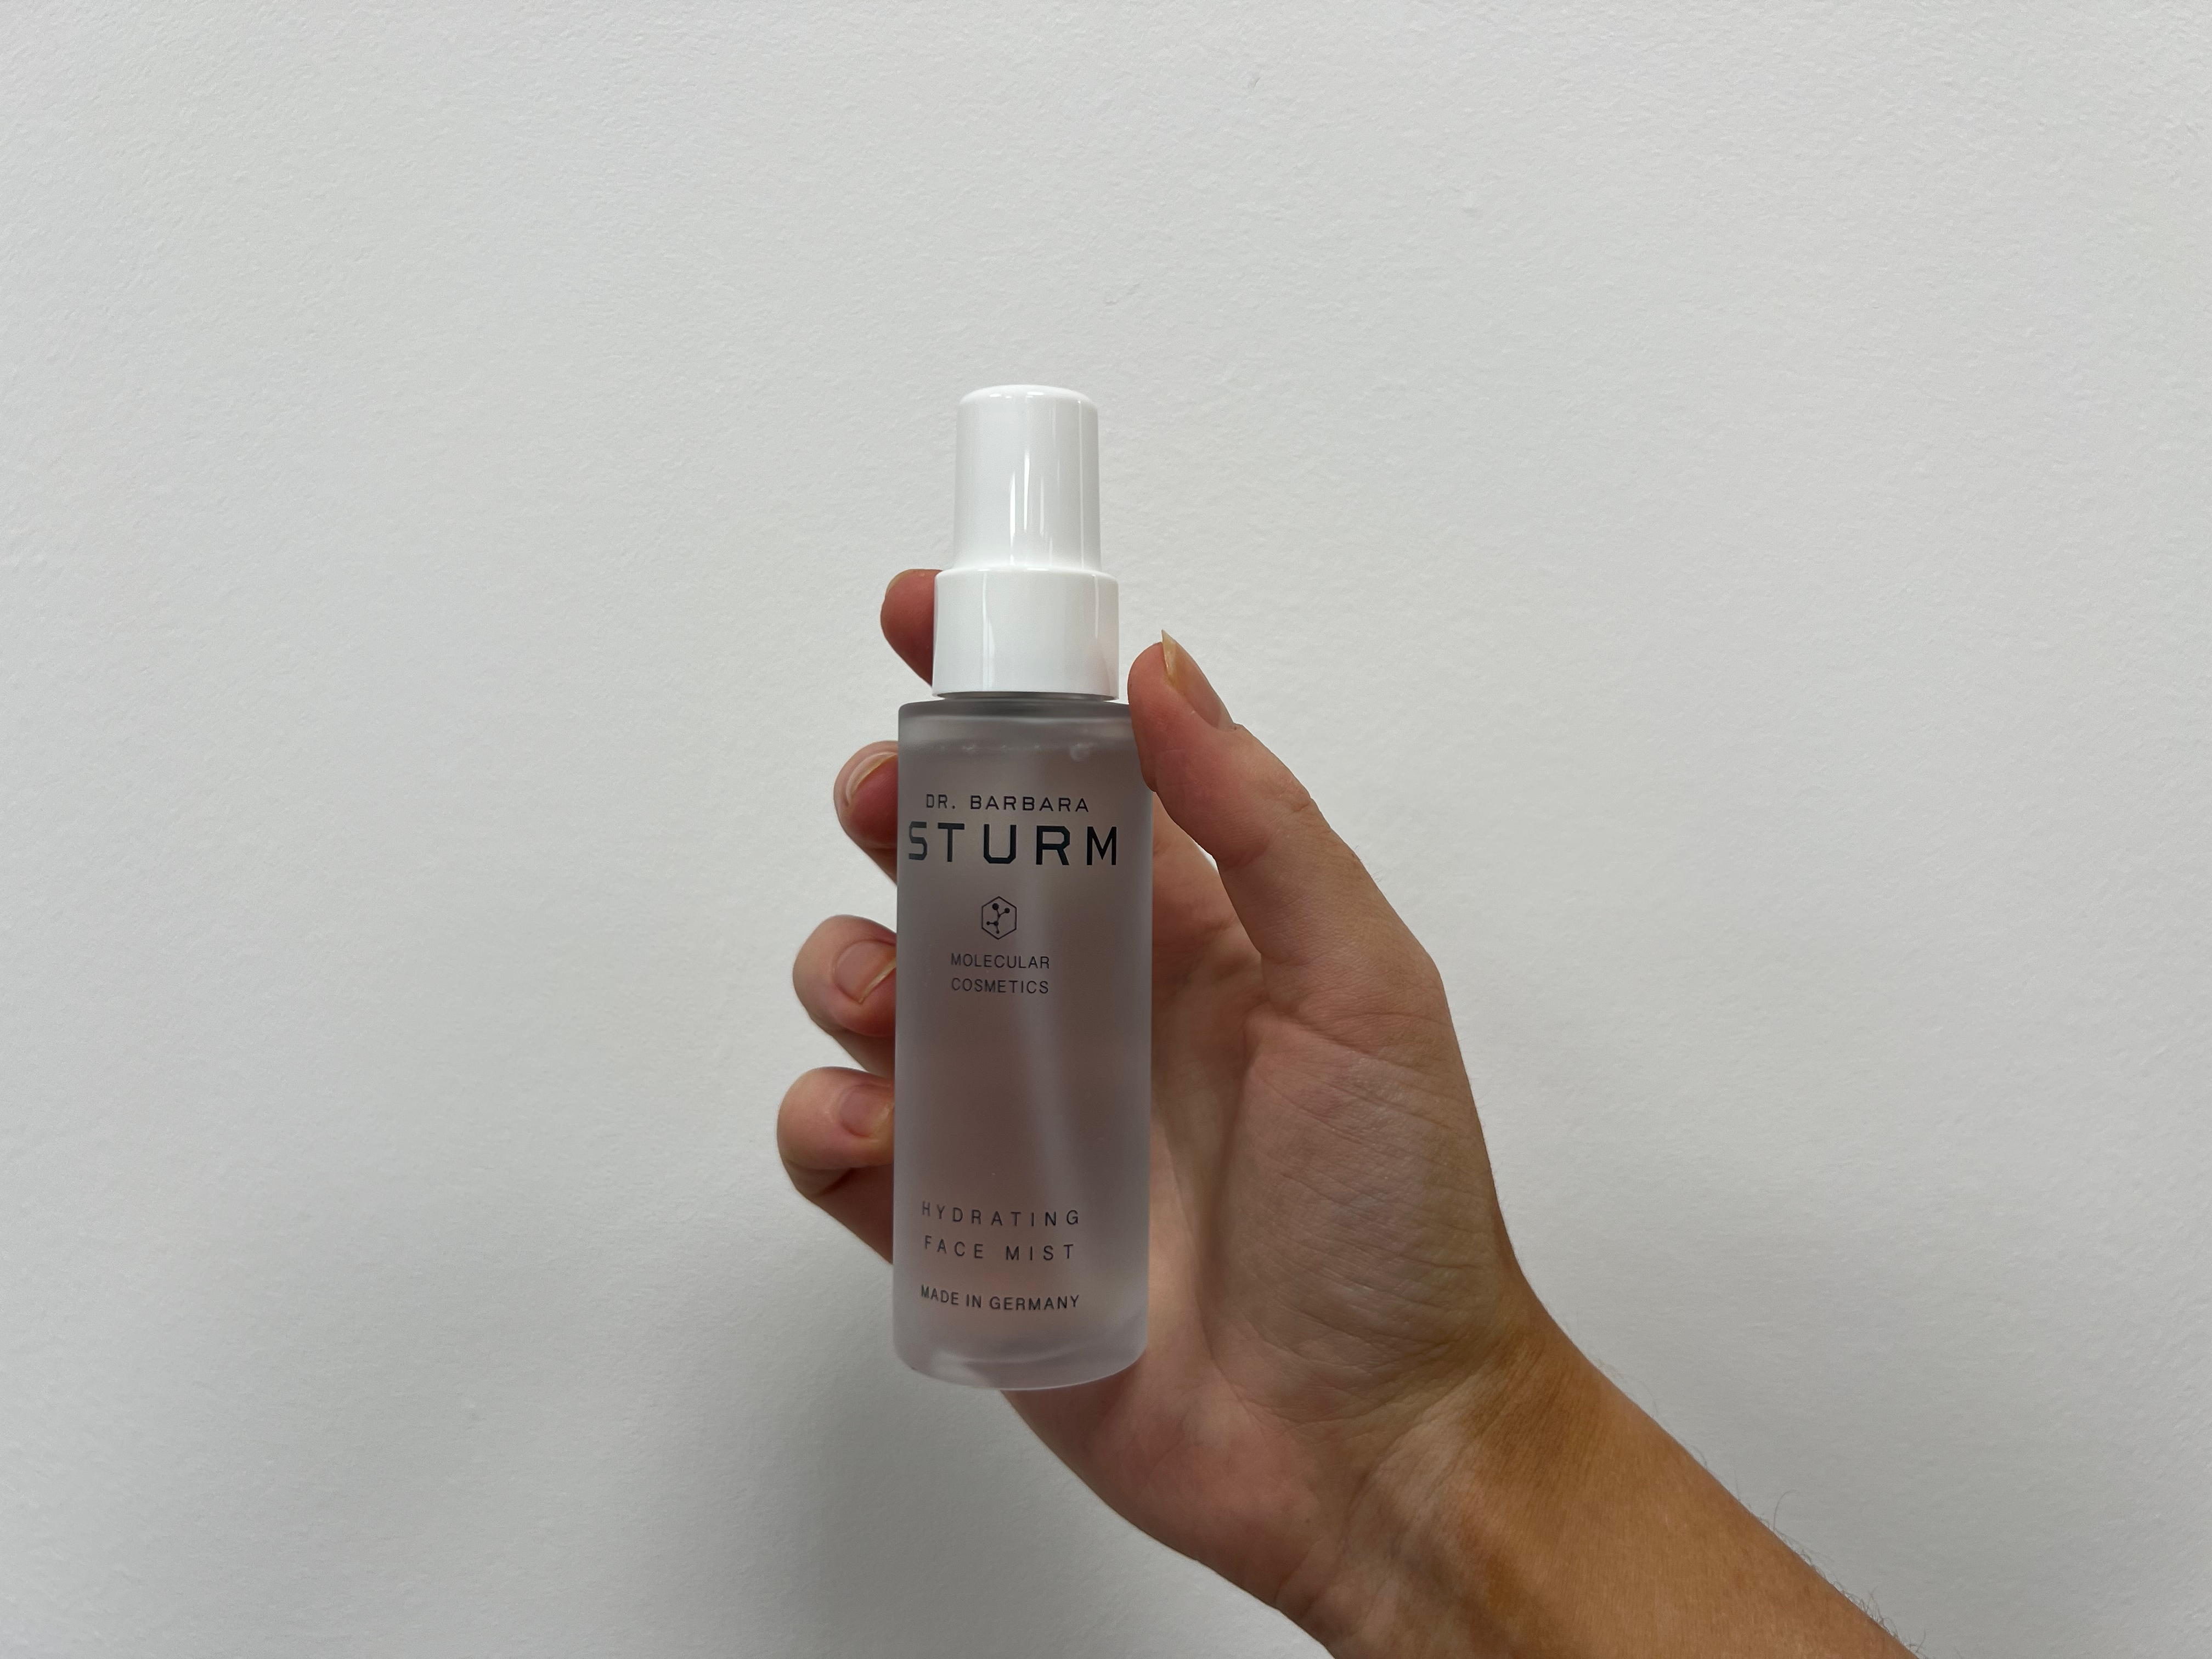 Dr. Barbara Sturm hydrating face mist review